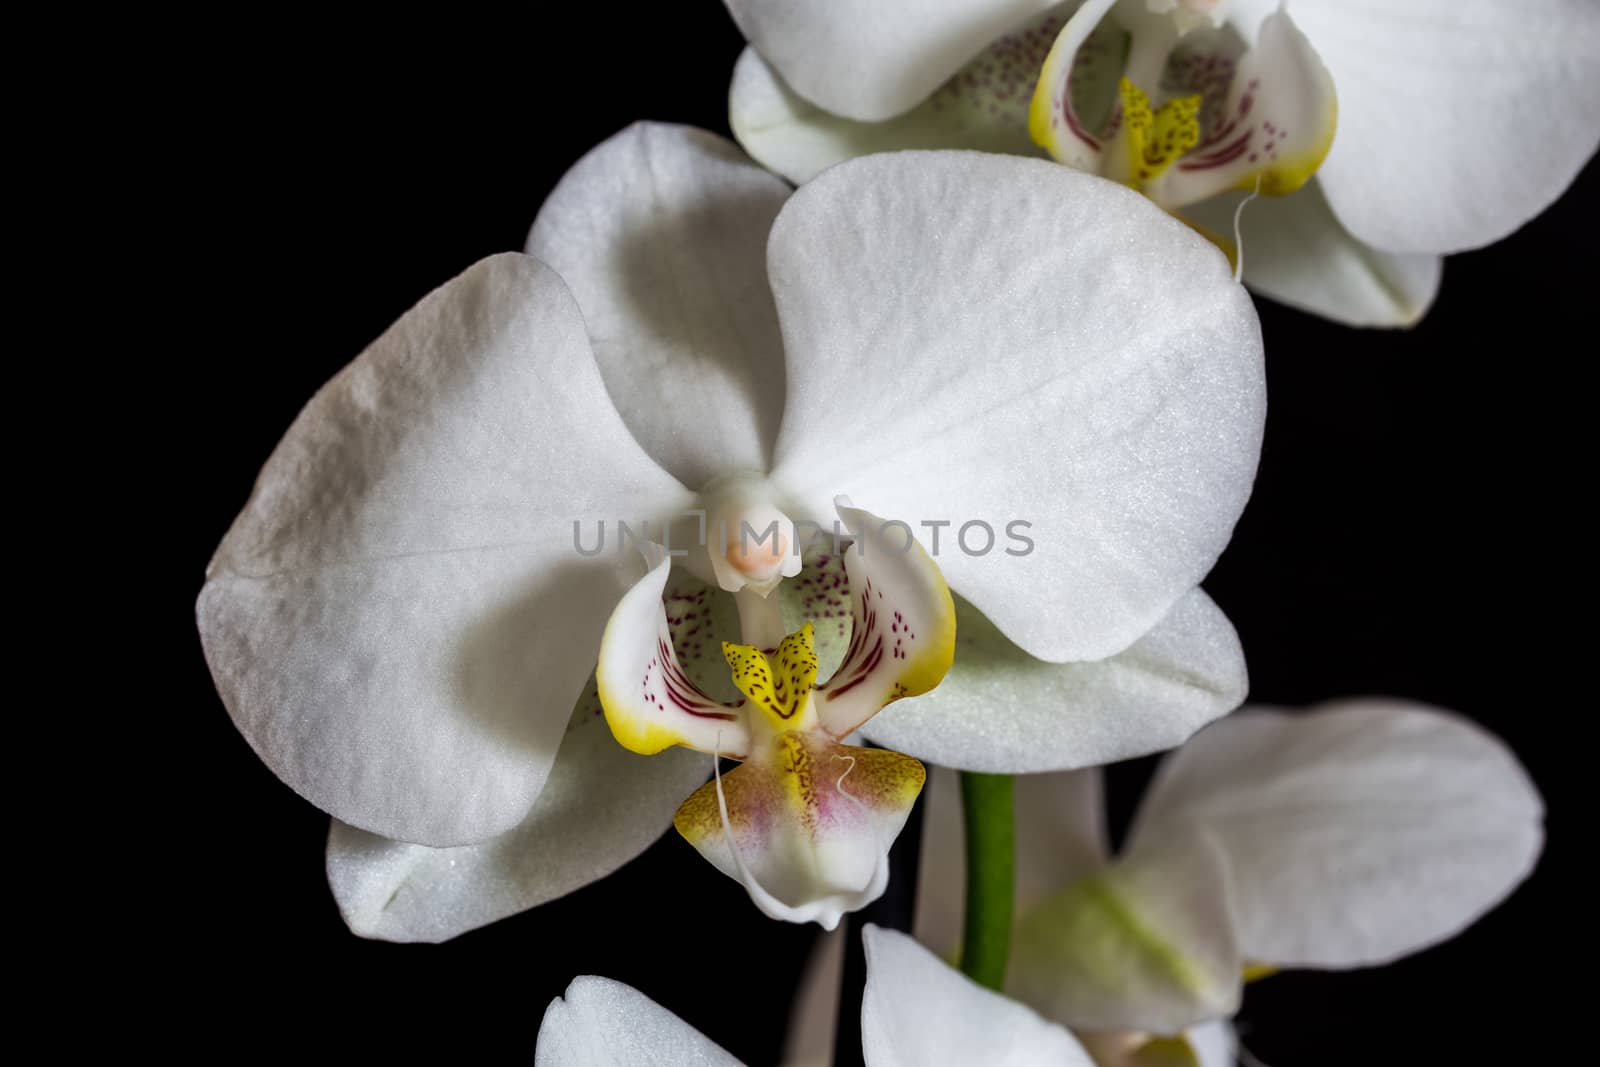 White orchid  by Digoarpi